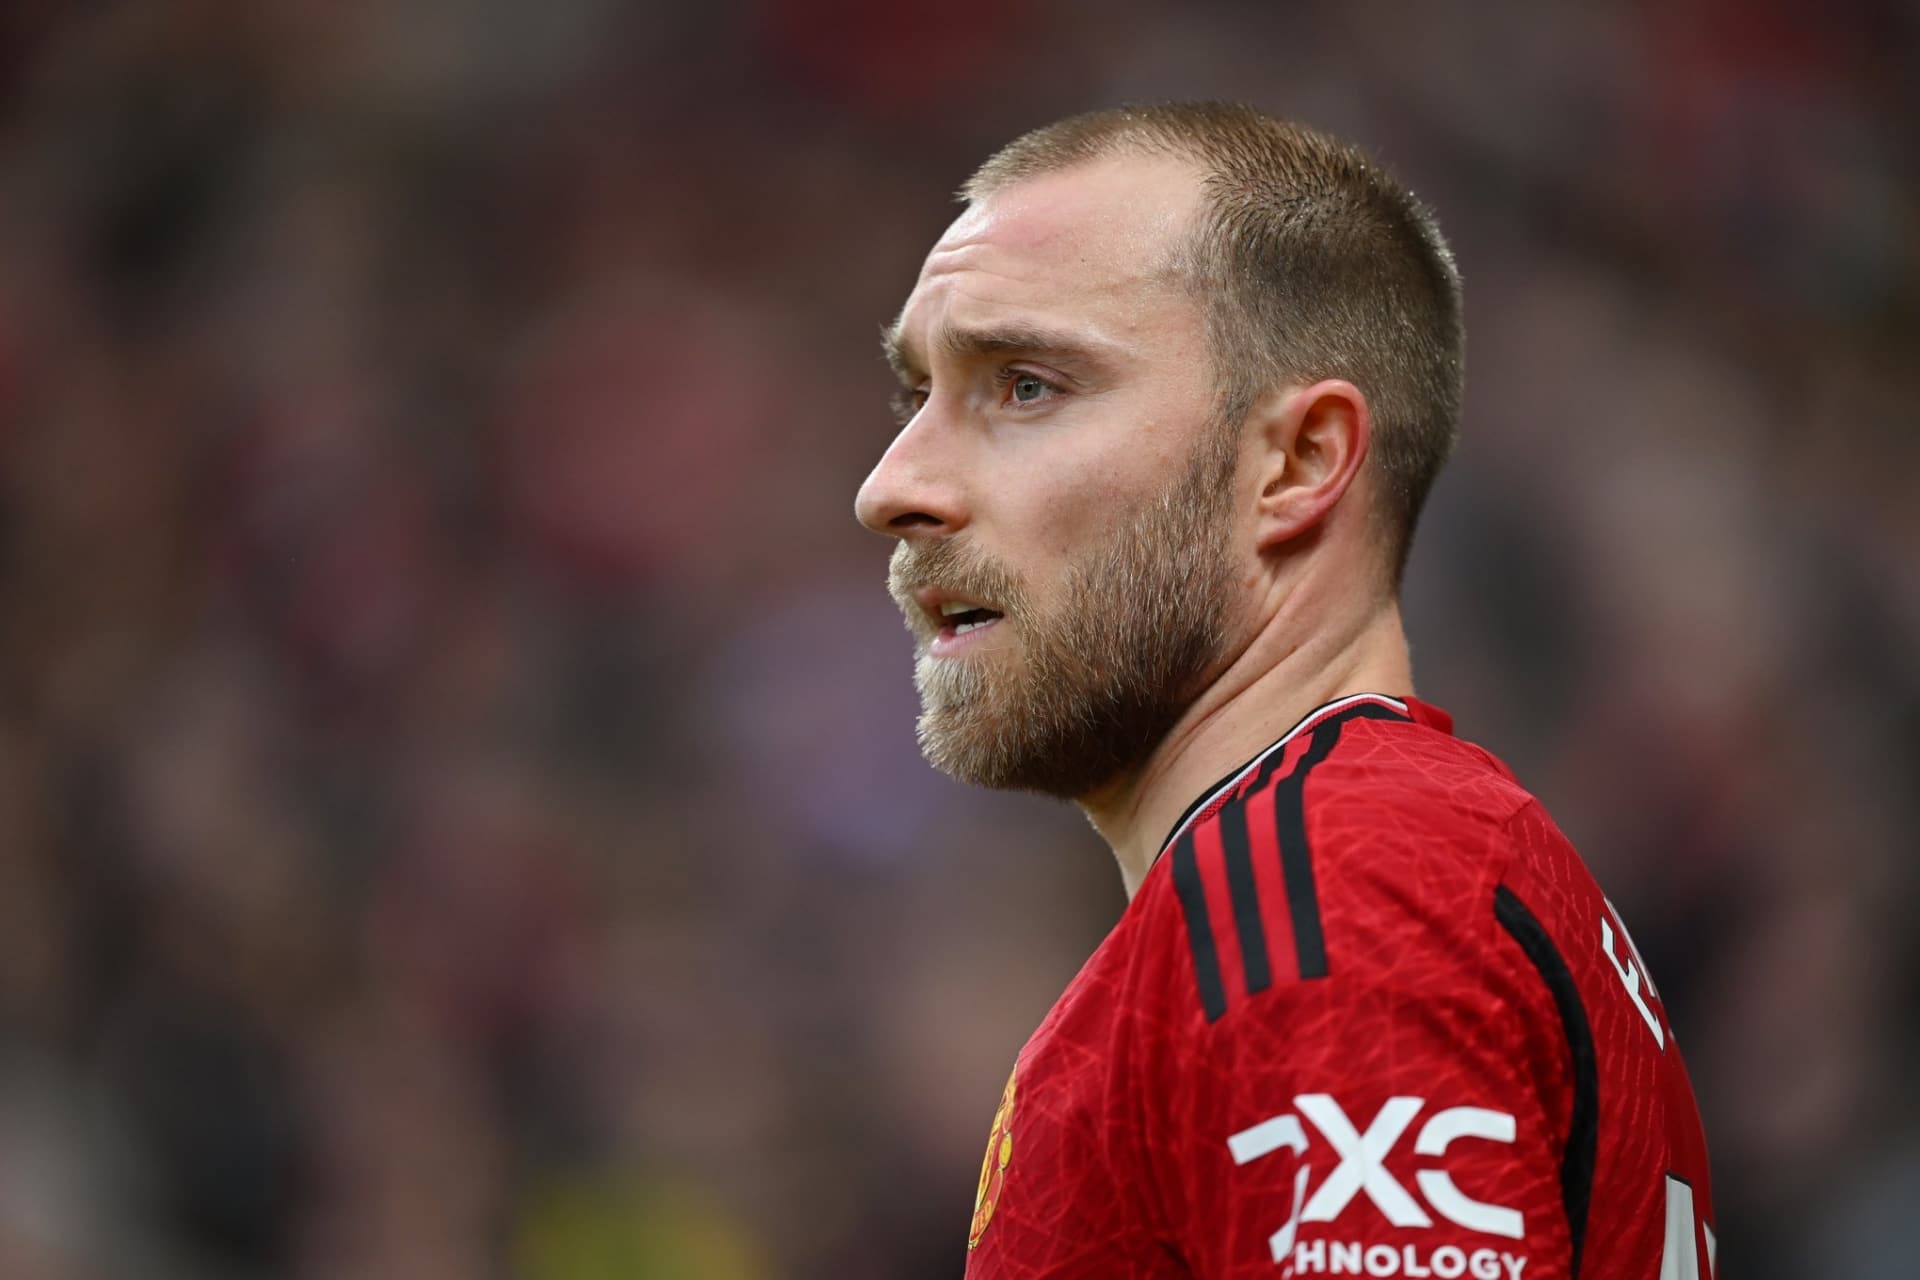 Christian Eriksen unhappy with limited playing time at Manchester United